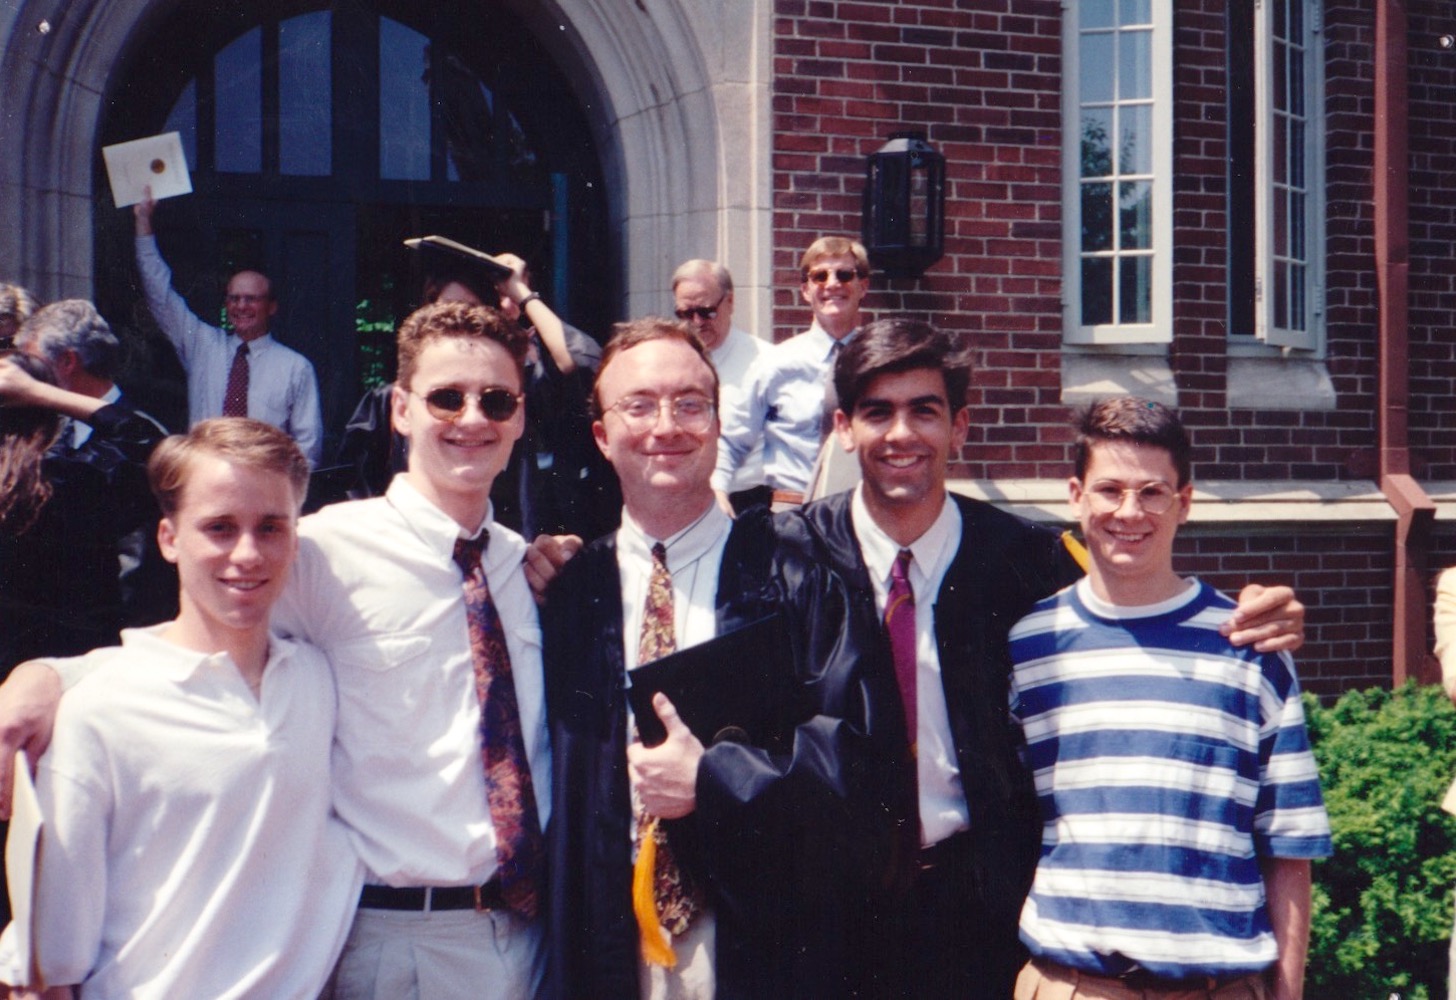 (L-R) Paul Feeney, David Van Dalfsen, Andy Dailey, Matthew Parsons, and Jim Bridges. K.C. shares, “These were some of the students meeting at West Side Row in my residence. I snapped a photo after graduation.” 